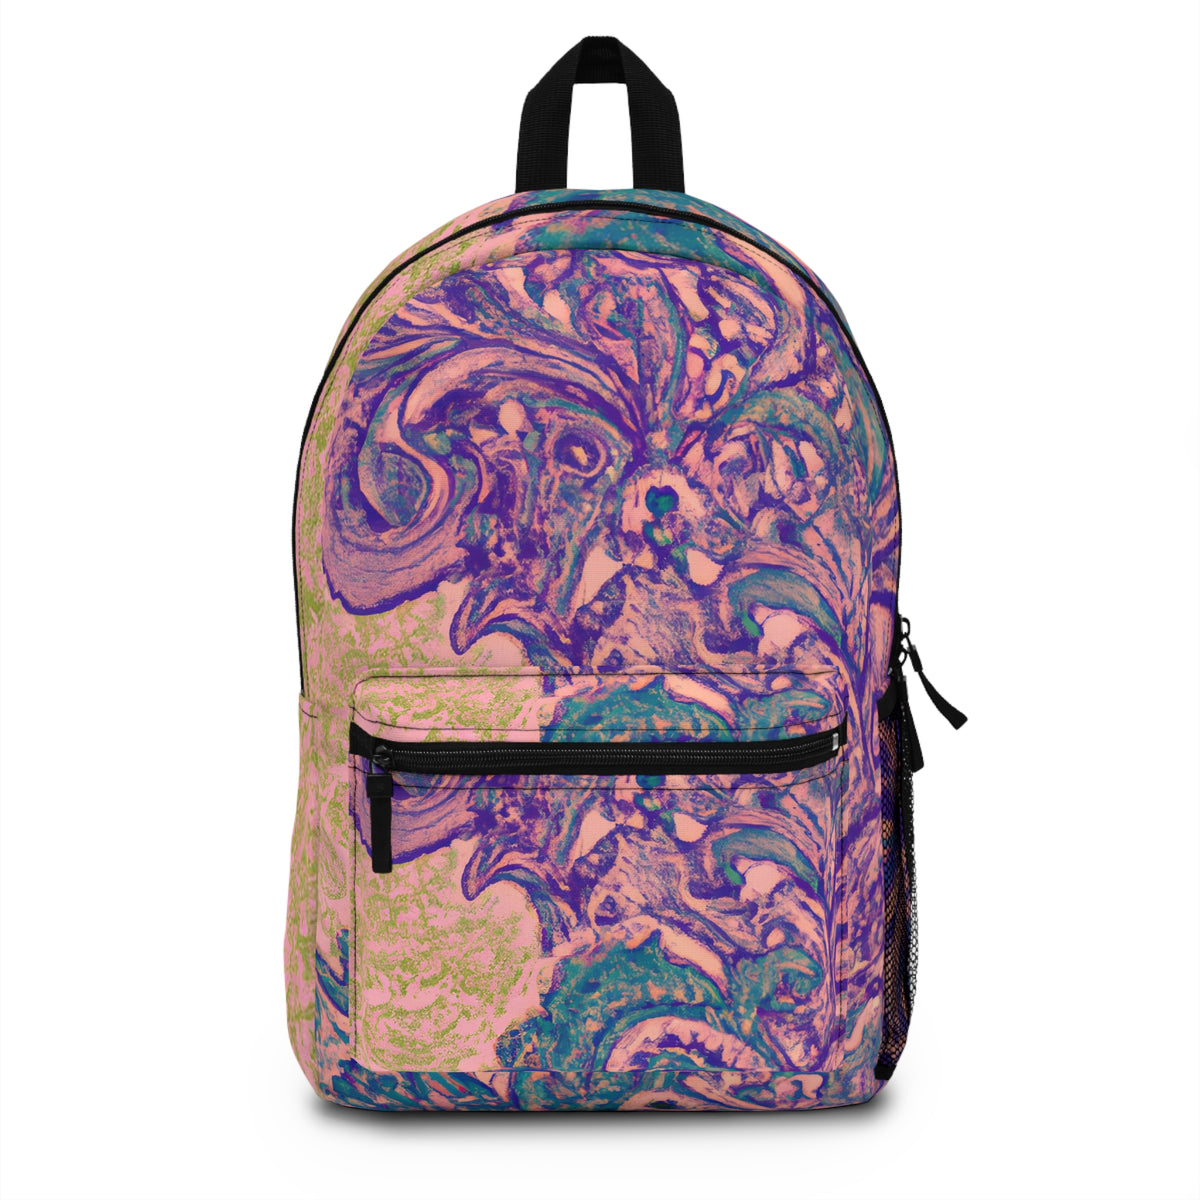 MagnoliaVaudeville - Gay-Inspired Backpack